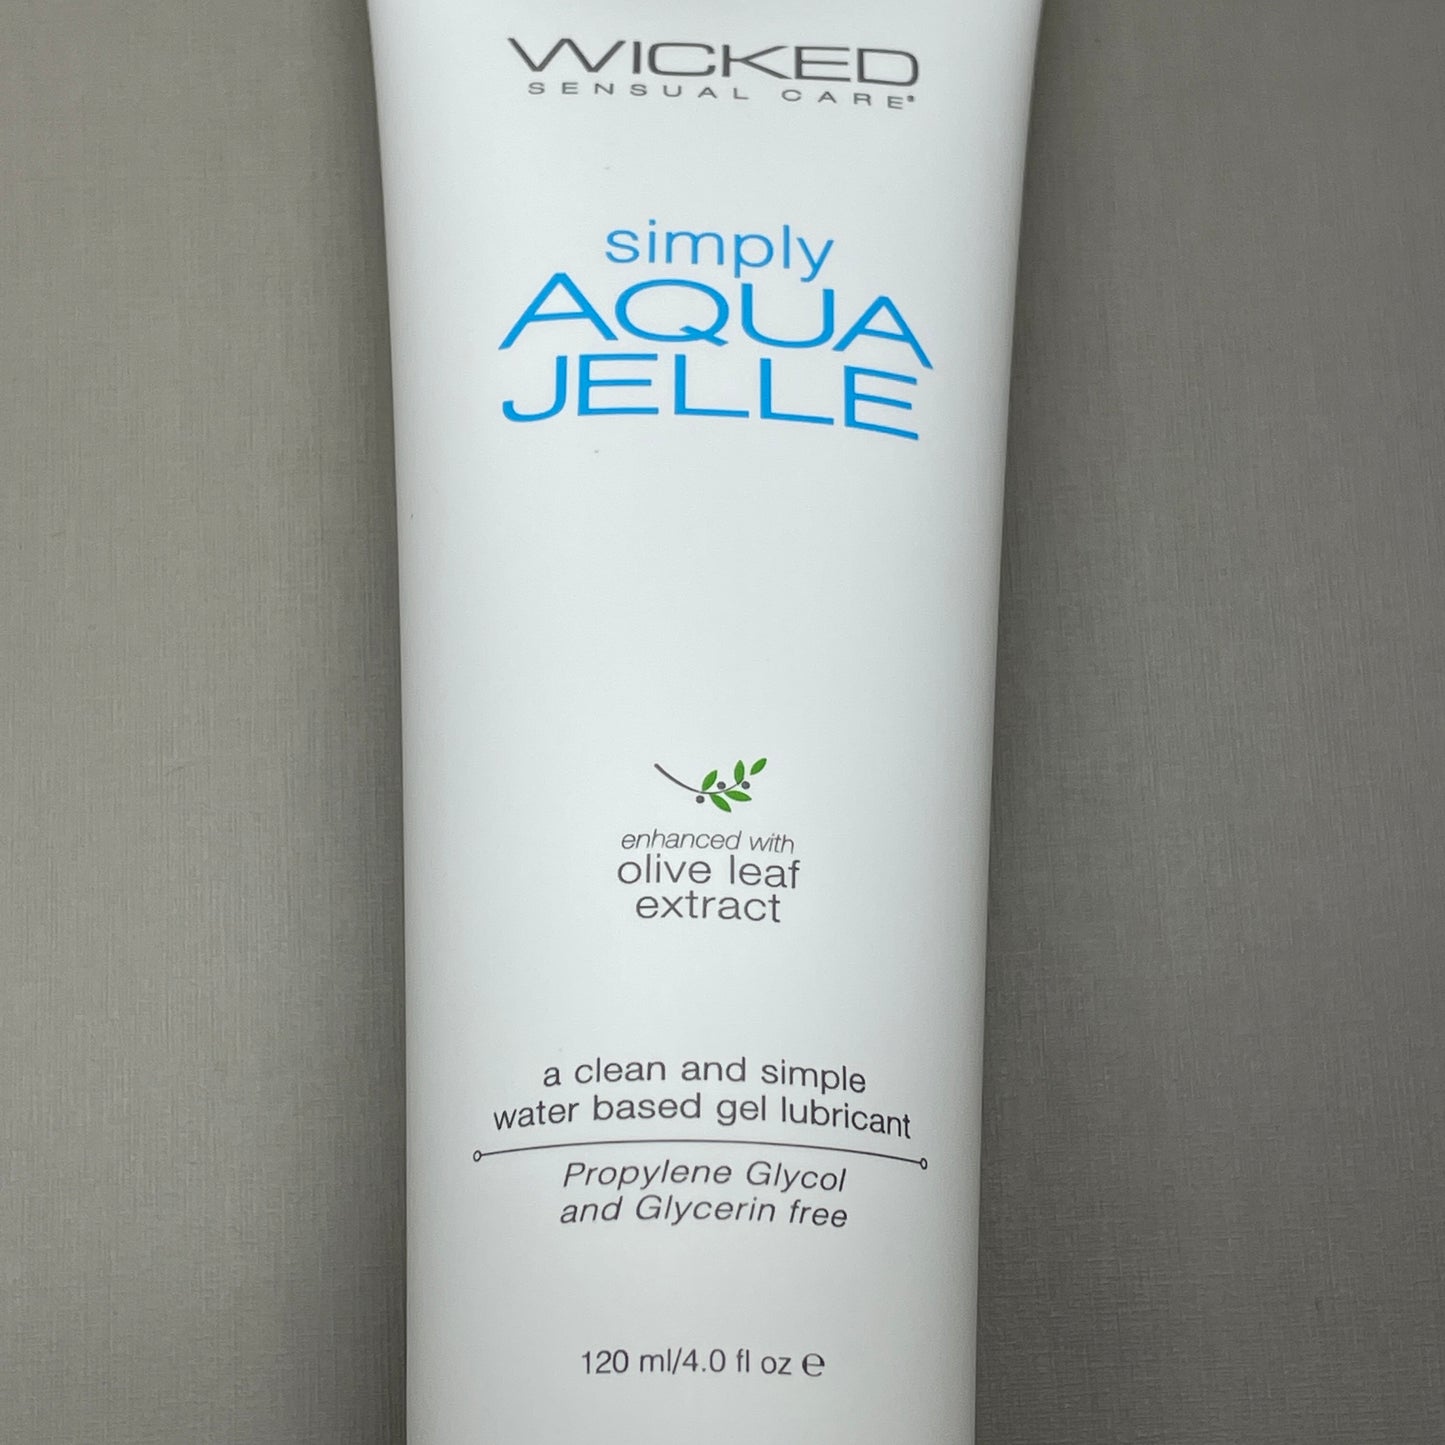 WICKED SENSUAL CARE Simply Aqua Jelle Olive Leaf Extract Water Based Gel Lubricant 4 oz 12/23 (New)